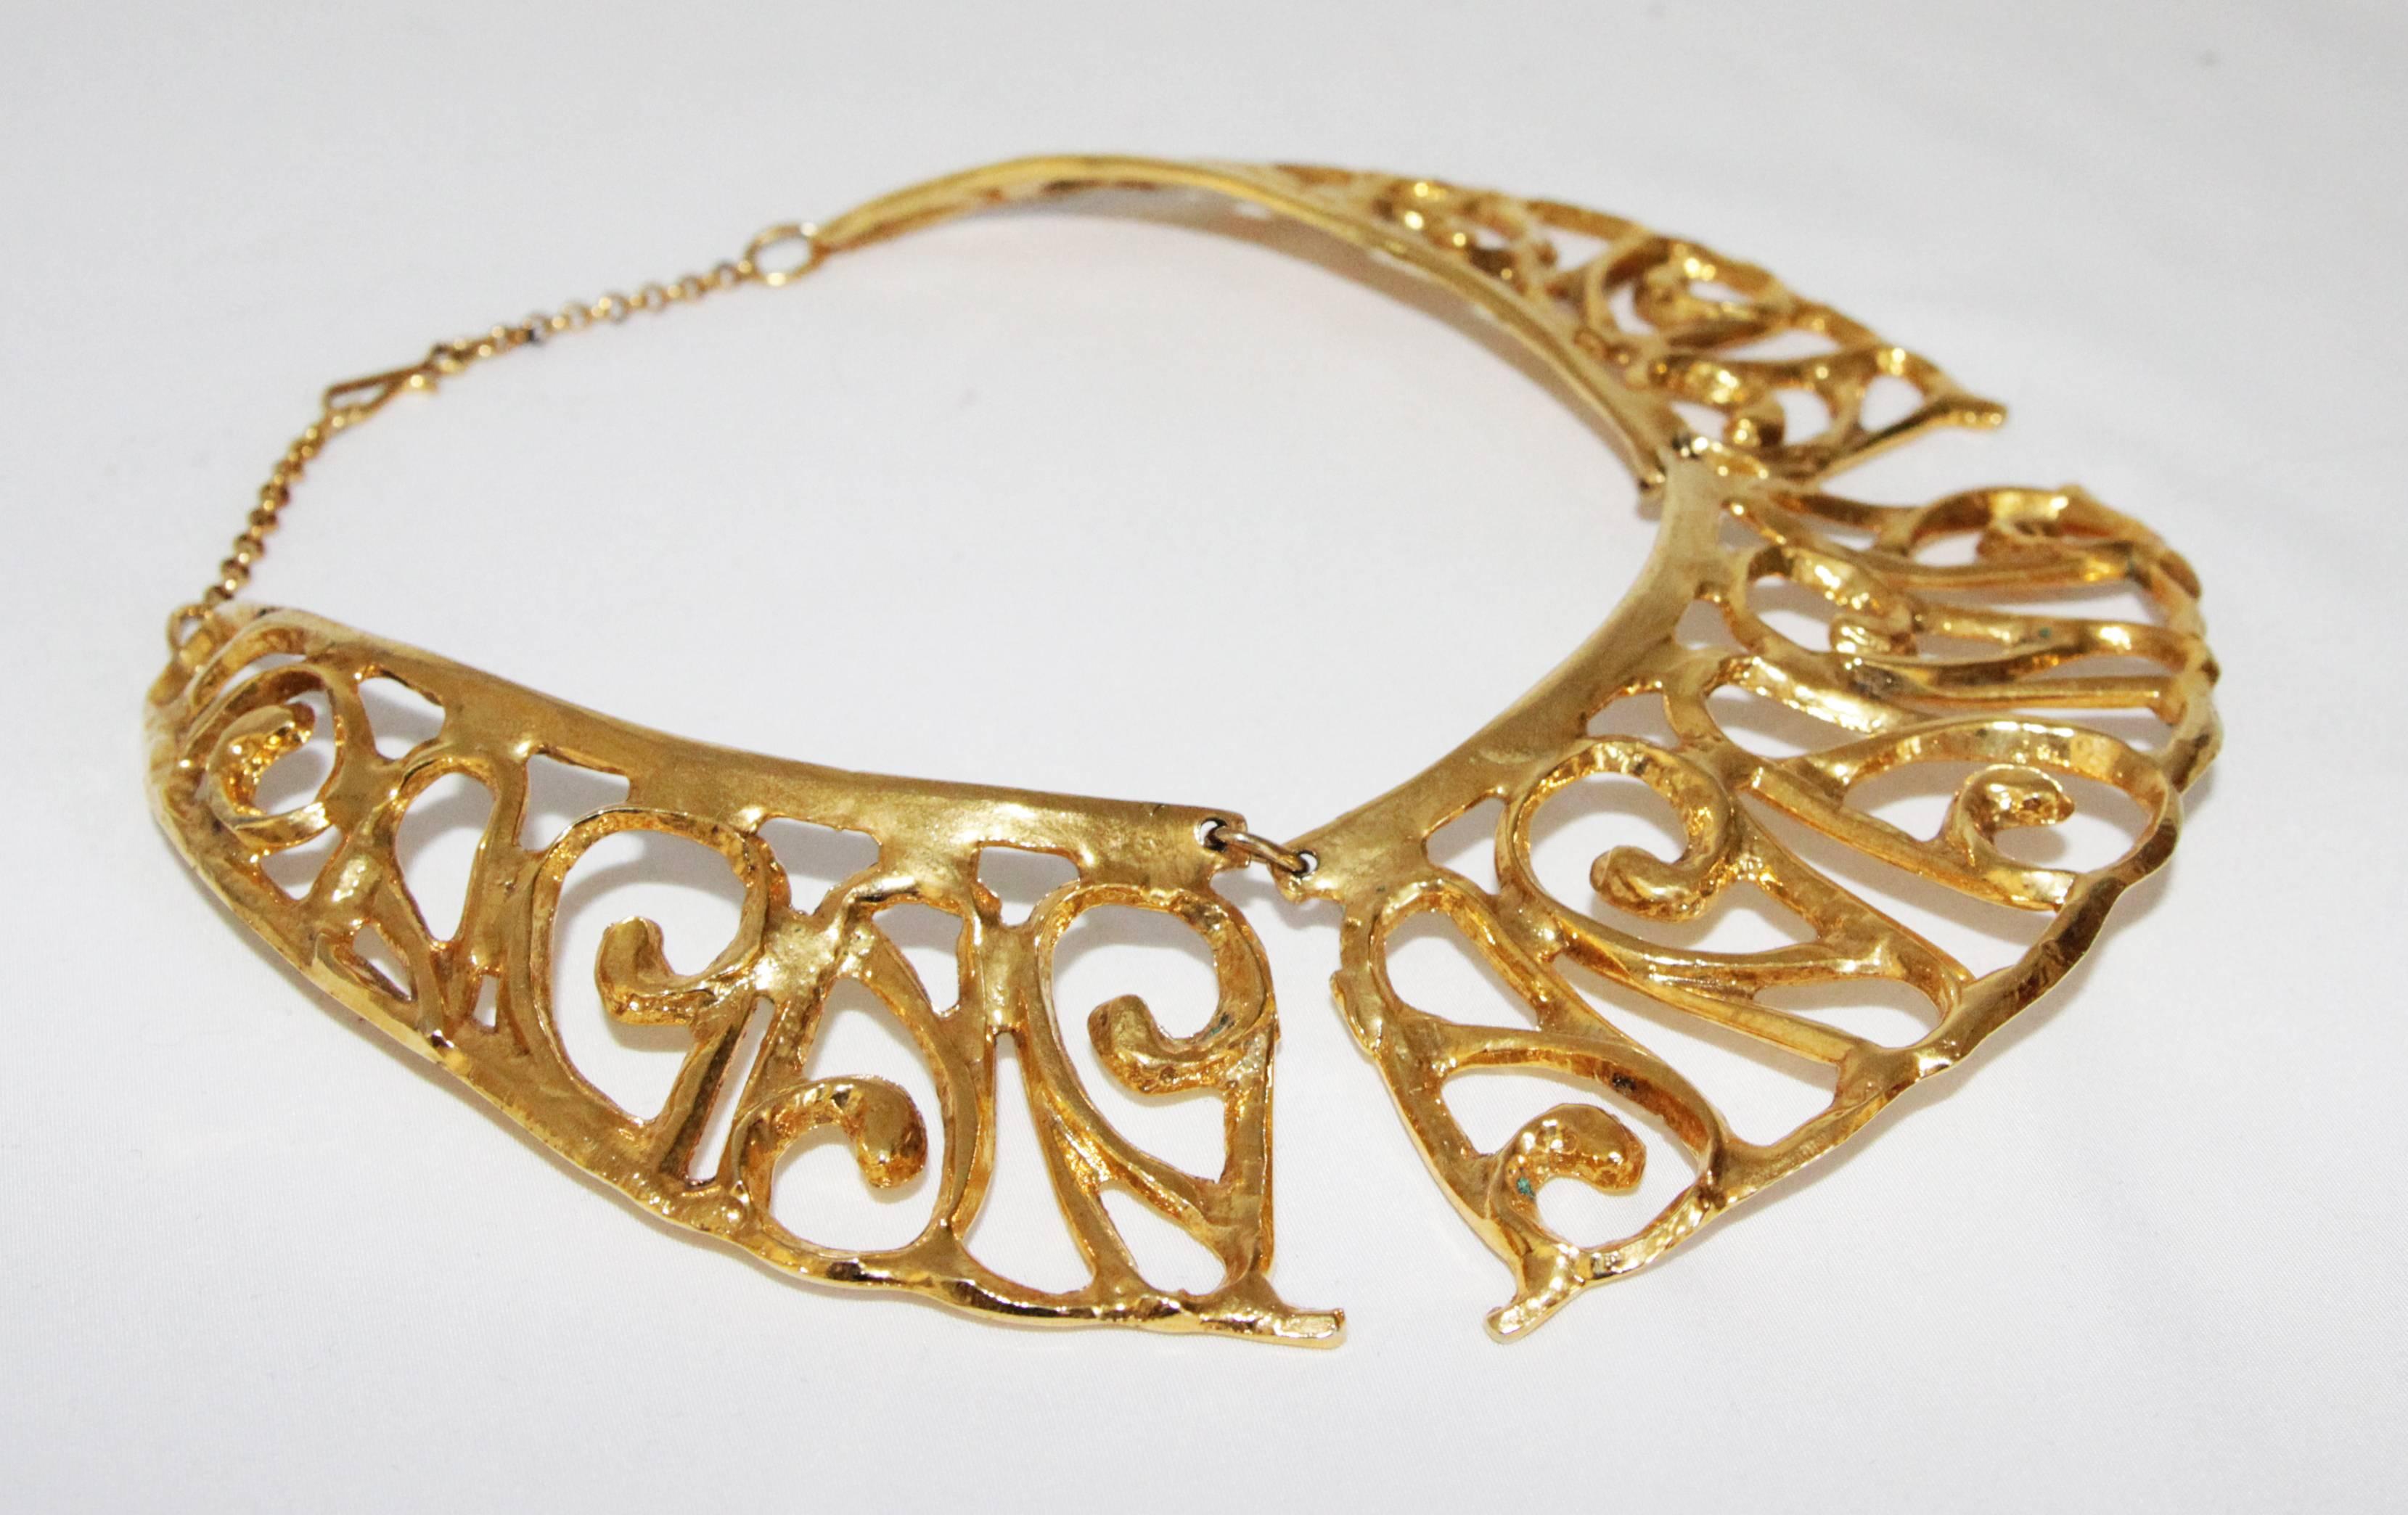 Unique & gorgeous Arabesque French vintage couture necklace of the 80s. A statement piece. Made of gilt metal. 

Size : 42 x 5 cm - 16.5 x 2 in. Adjustable clasp. 

Excellent vintage condition.  